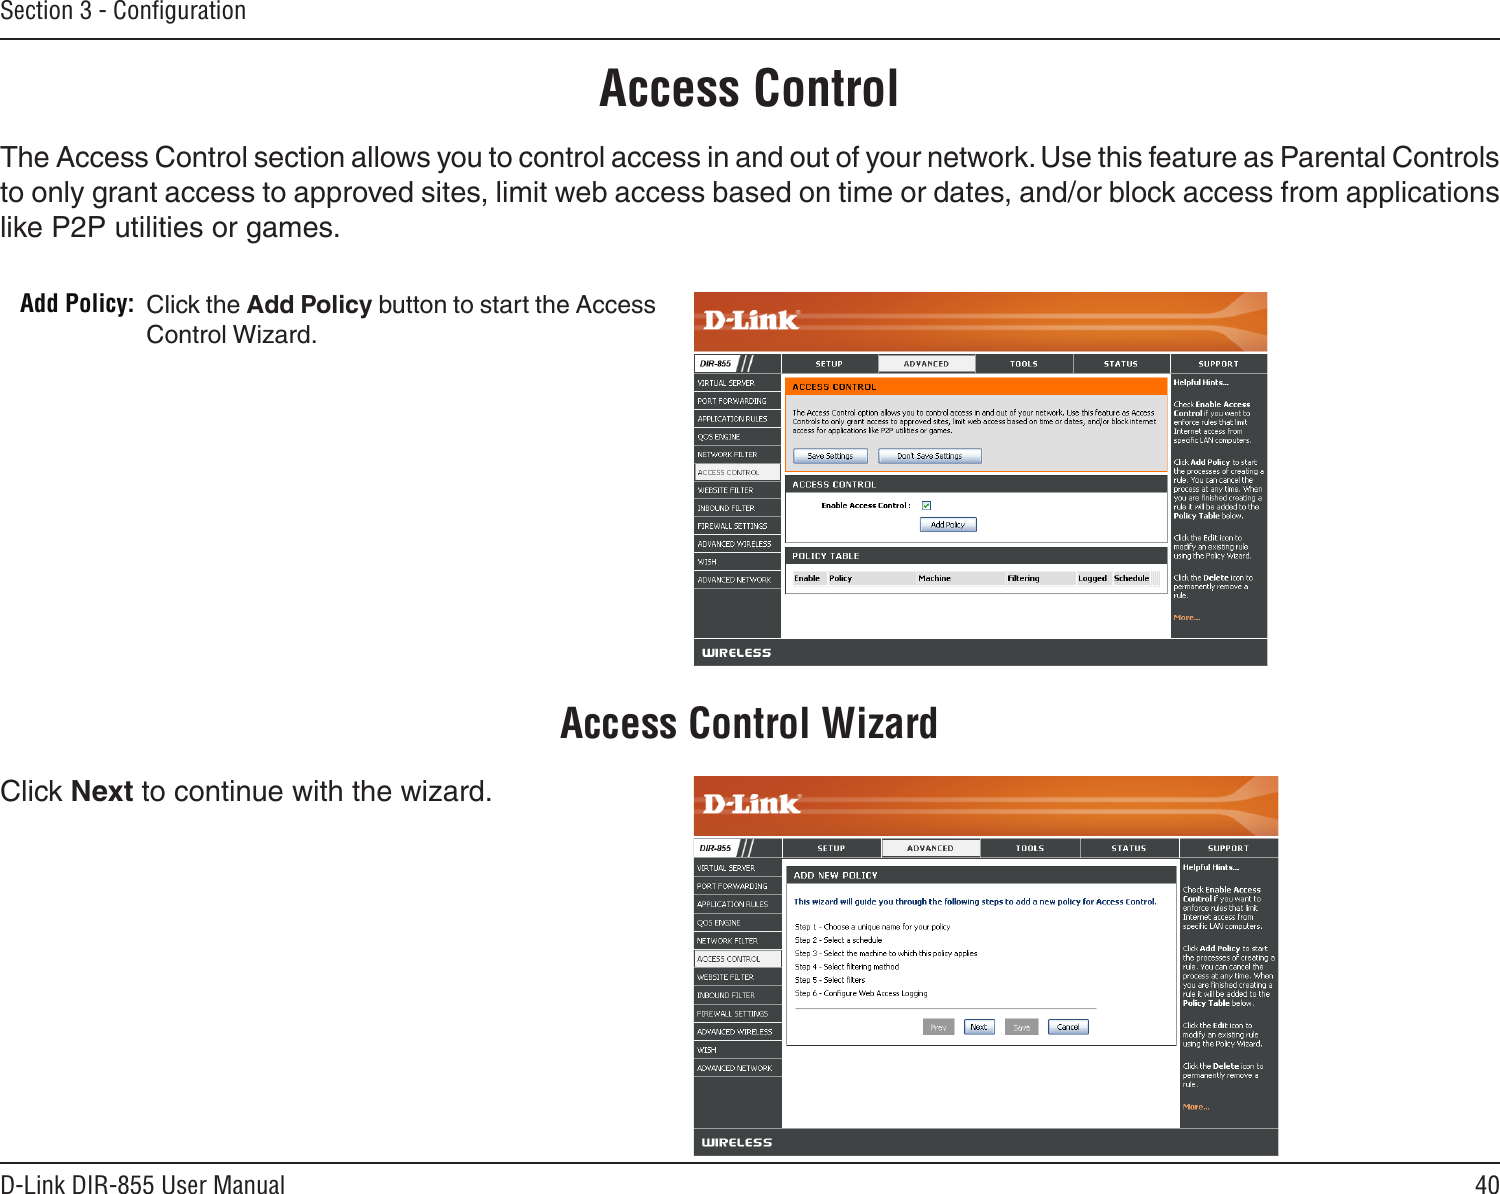 40D-Link DIR-855 User ManualSection 3 - ConﬁgurationAccess ControlClick the Add Policy button to start the Access Control Wizard. Add Policy:The Access Control section allows you to control access in and out of your network. Use this feature as Parental Controls to only grant access to approved sites, limit web access based on time or dates, and/or block access from applications like P2P utilities or games.Click Next to continue with the wizard.Access Control Wizard